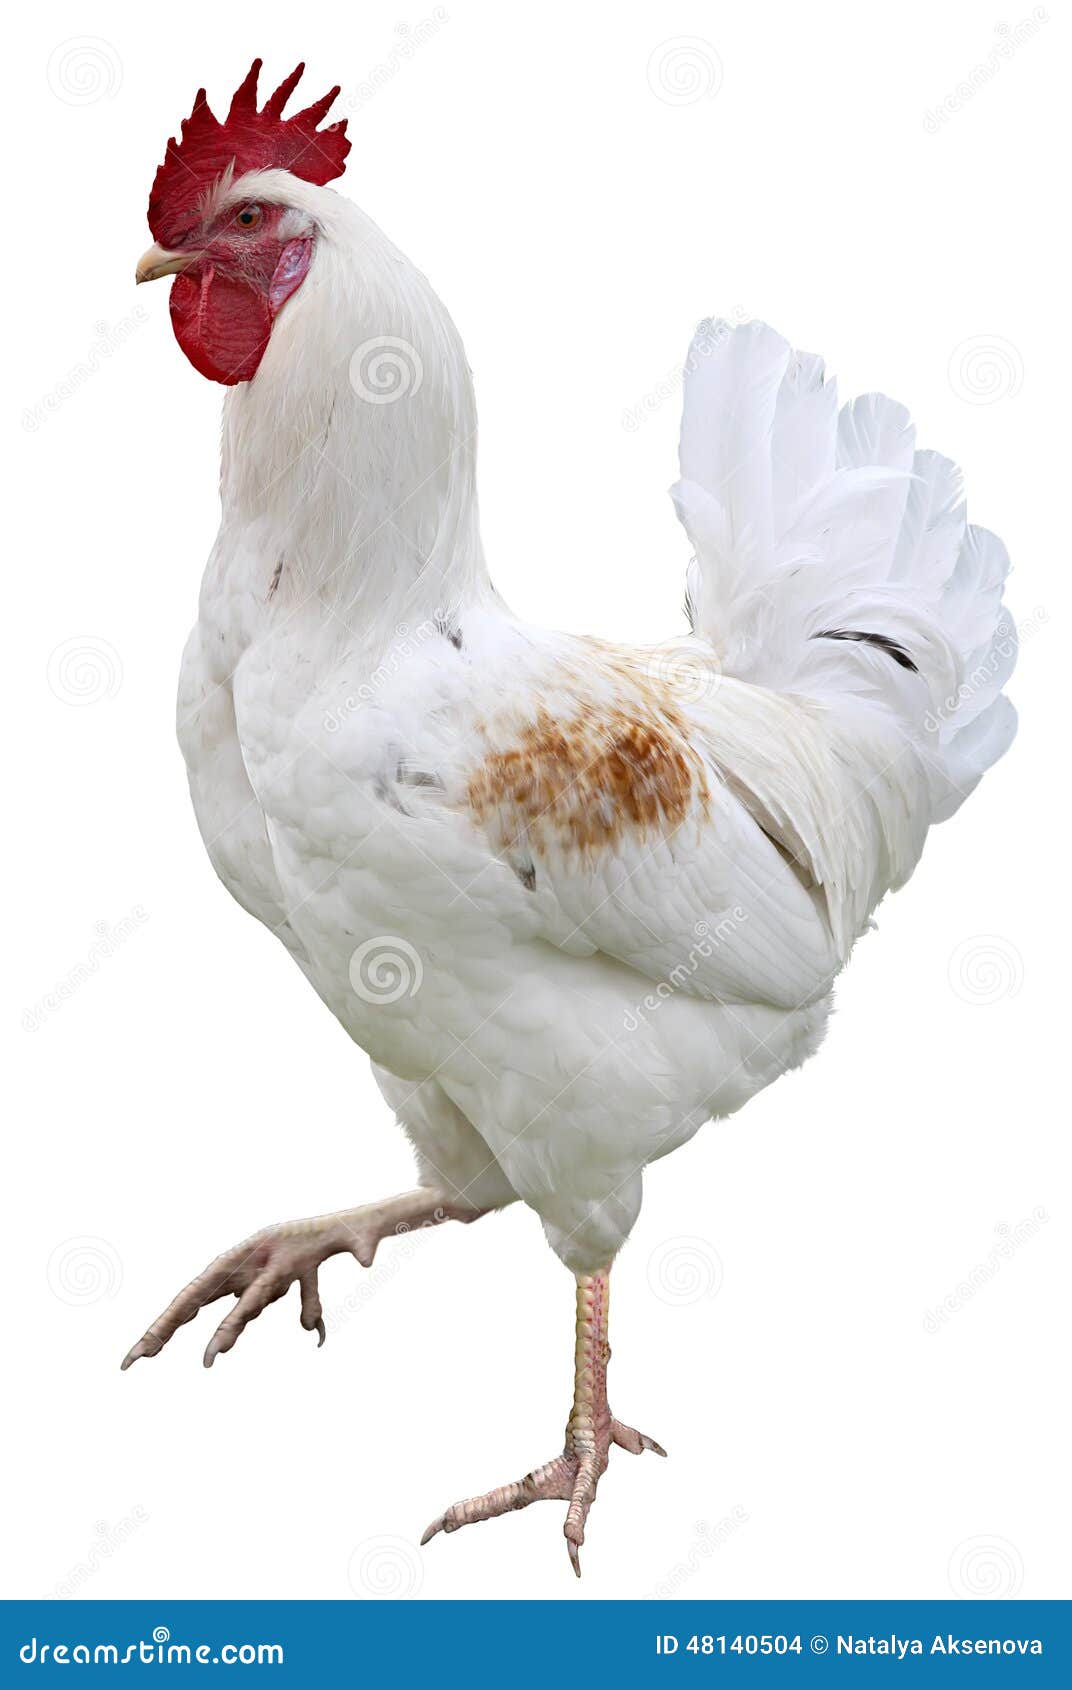 Rooster Chicken Isolated on White Background Stock Photo - Image of ...